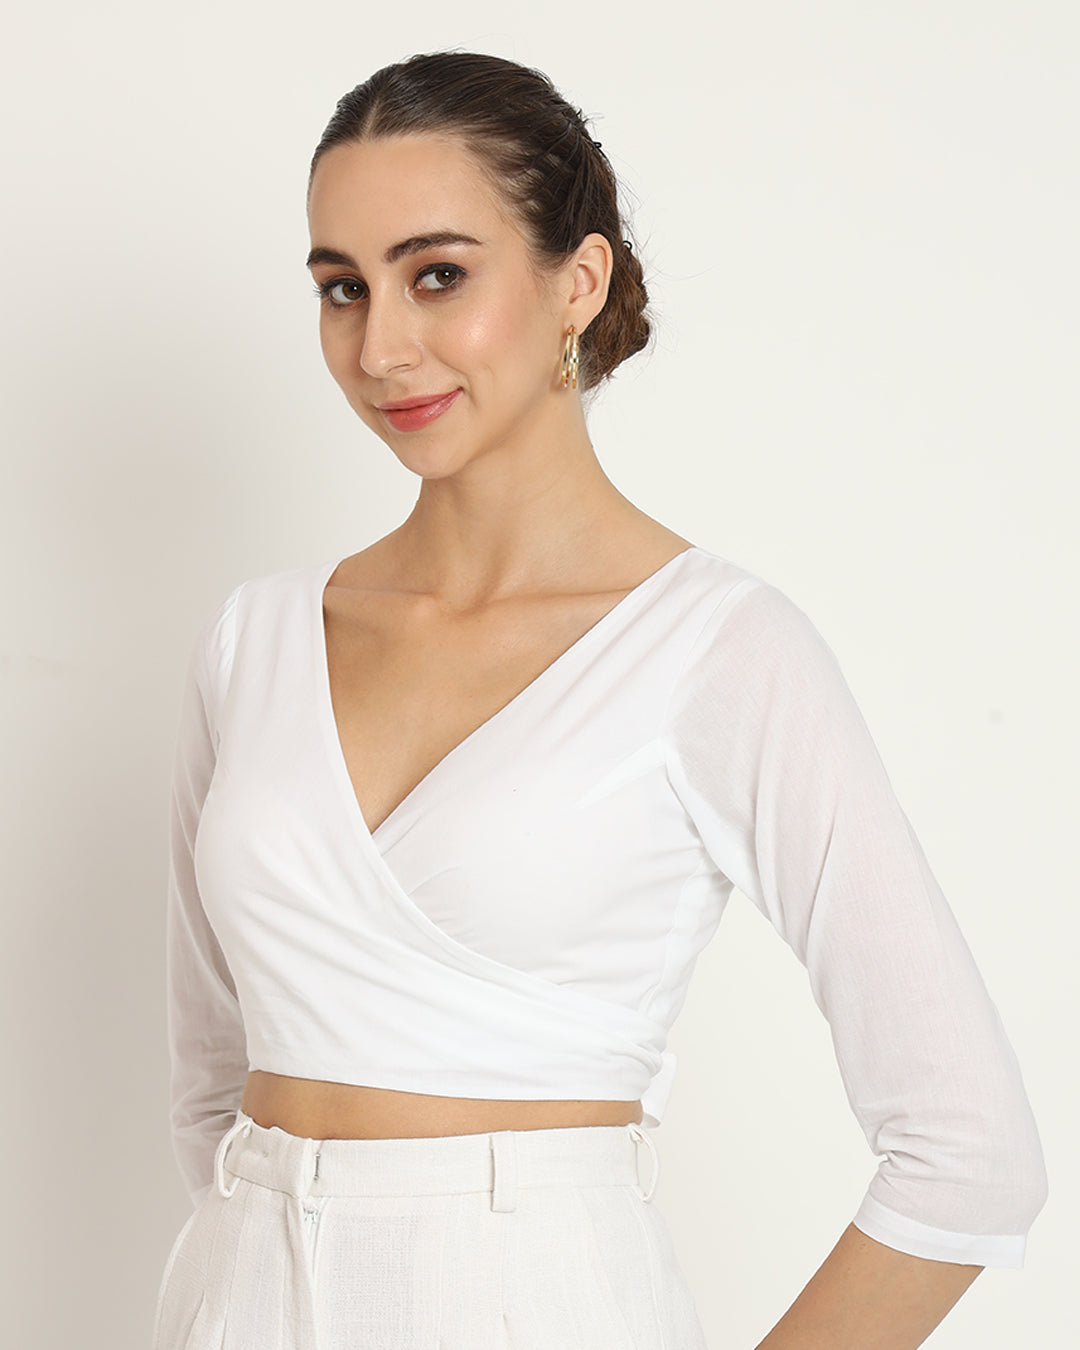 Pristine White Knotty By Nature Blouse